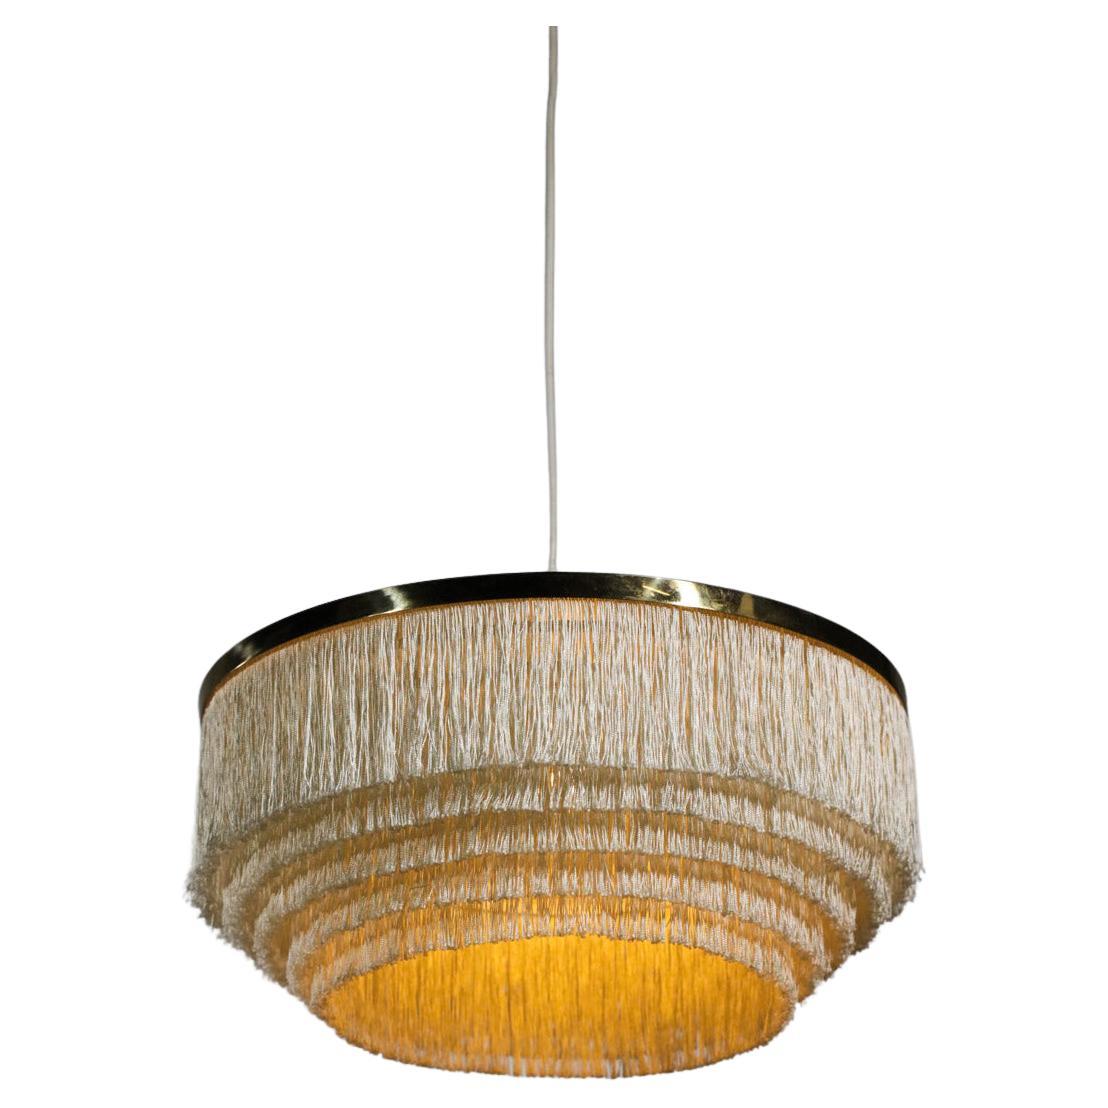 Large Scandinavian suspension lamp model T603 by the famous Swedish designer Hans Agne Jakobsson from the 60s. Solid brass structure and attachment, off-white silk fringe diffuser, very nice vintage condition with a nice patina on the brass (see